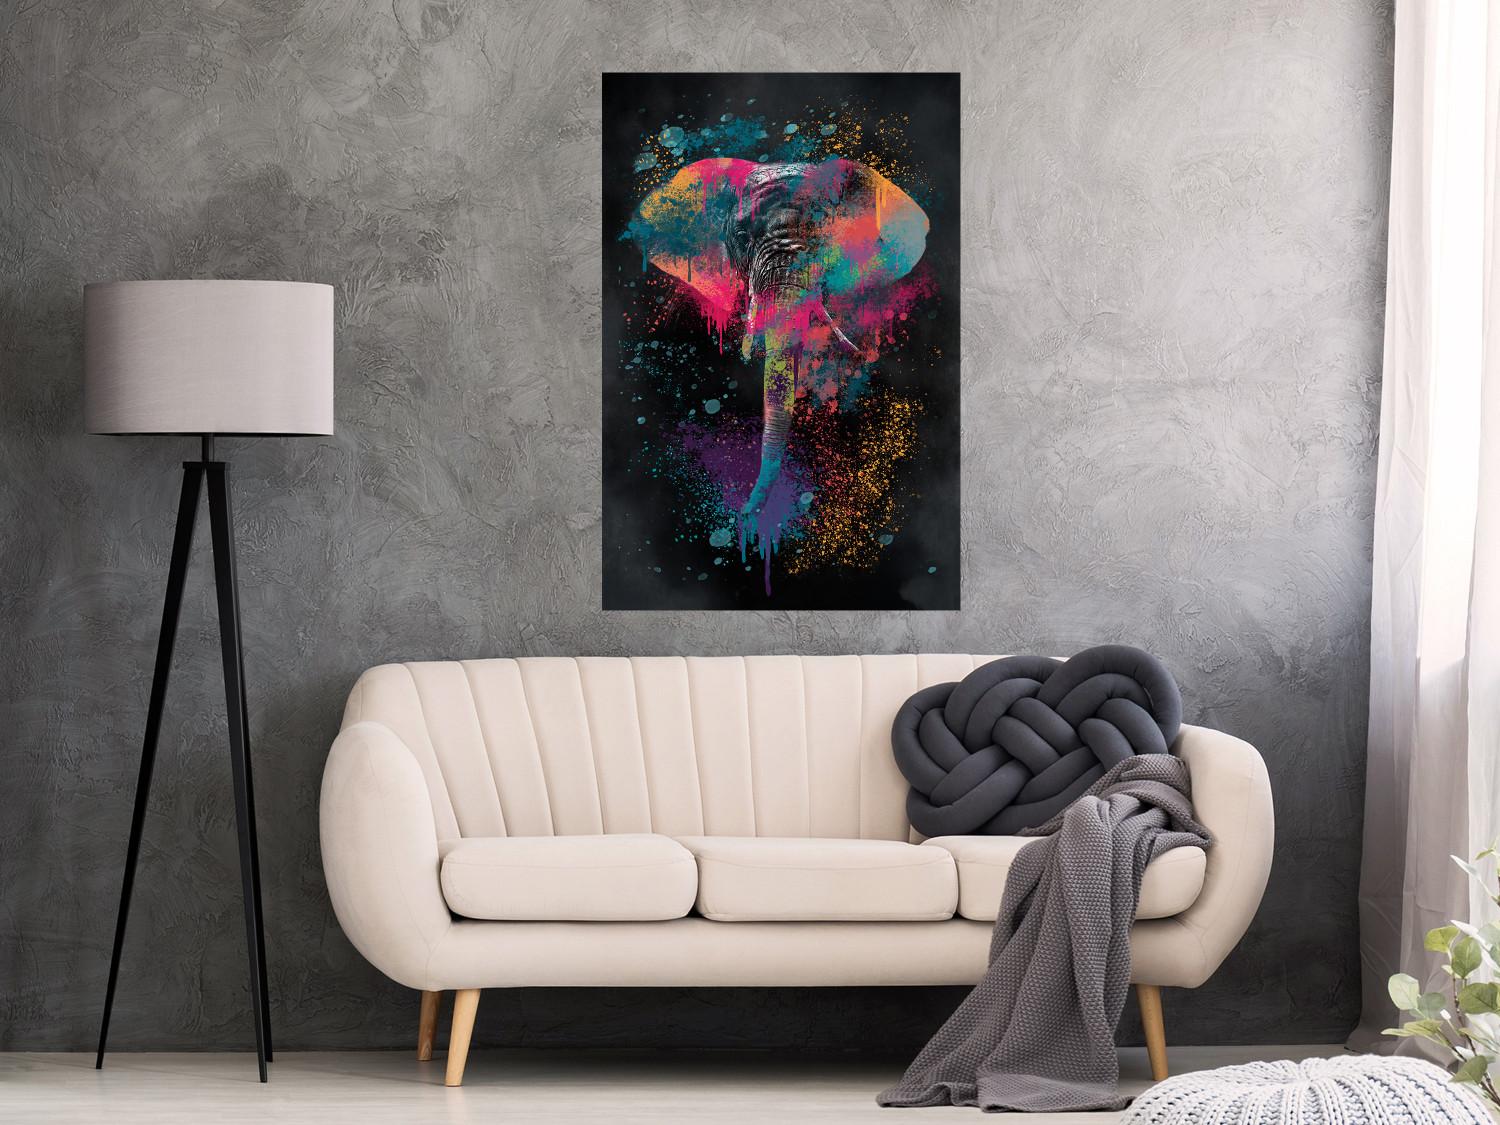 Poster Colorful Safari - multicolored elephant in a watercolor motif on a black background